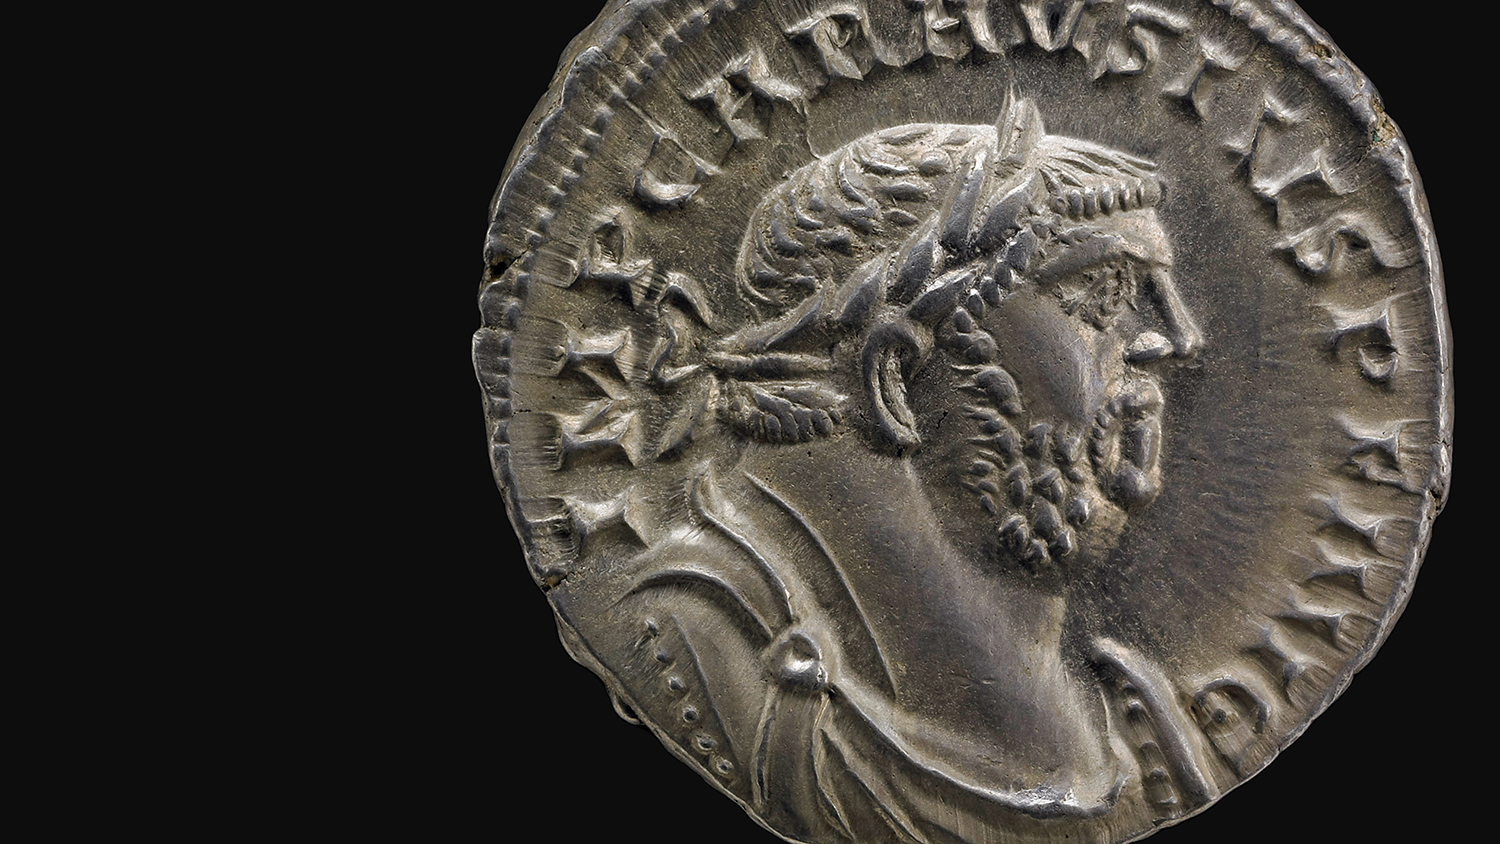 Long Table 163. The Silver Coinage of Carausius (AD 286-93)